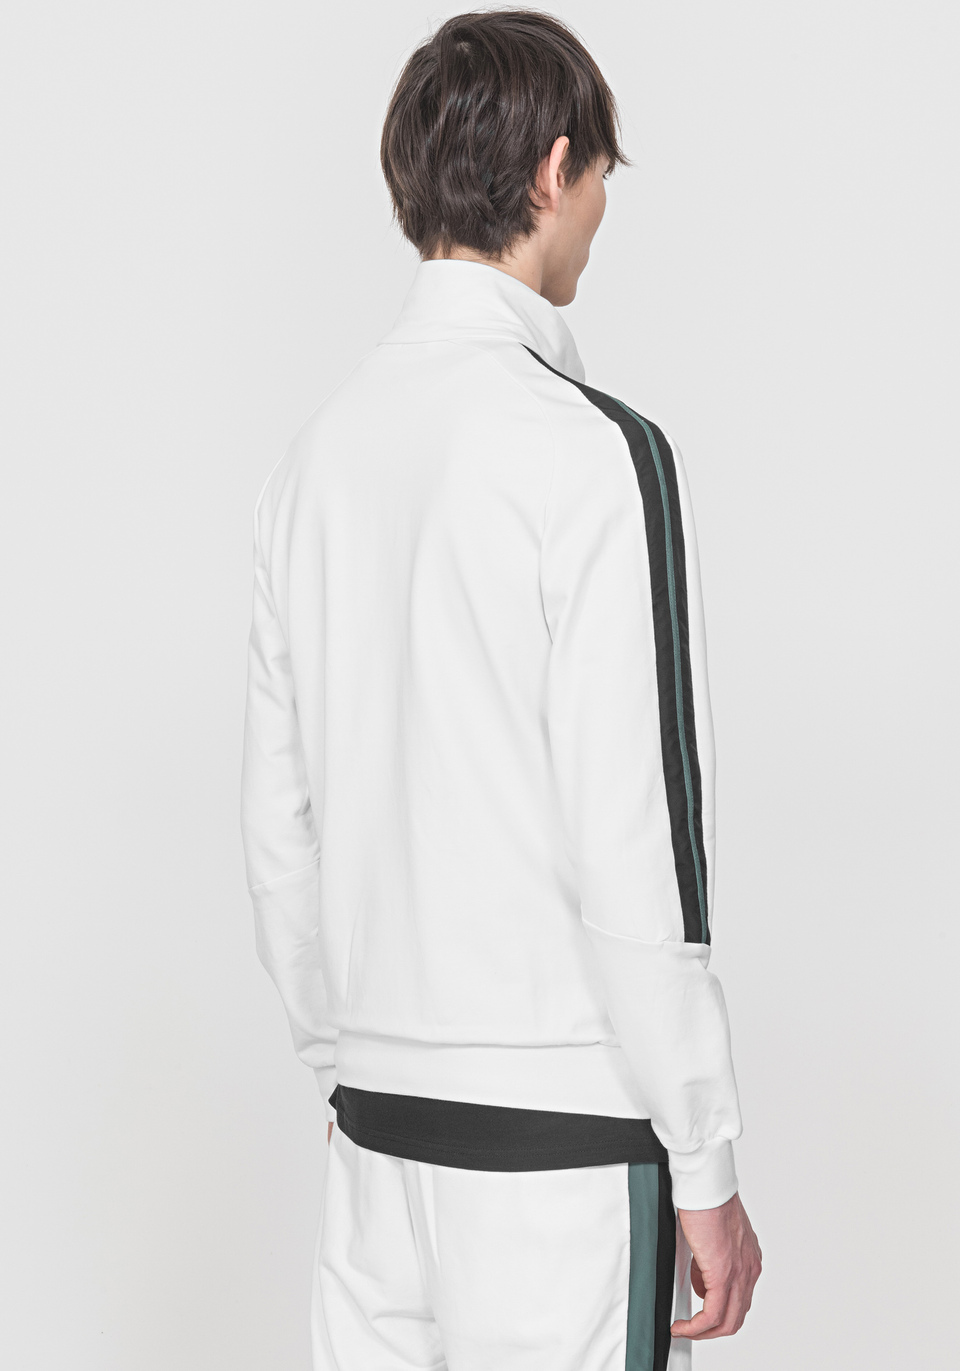 SWEATSHIRT IN STRETCH COTTON JERSEY WITH ZIPS AND DECORATIVE BANDS - Antony Morato Online Shop